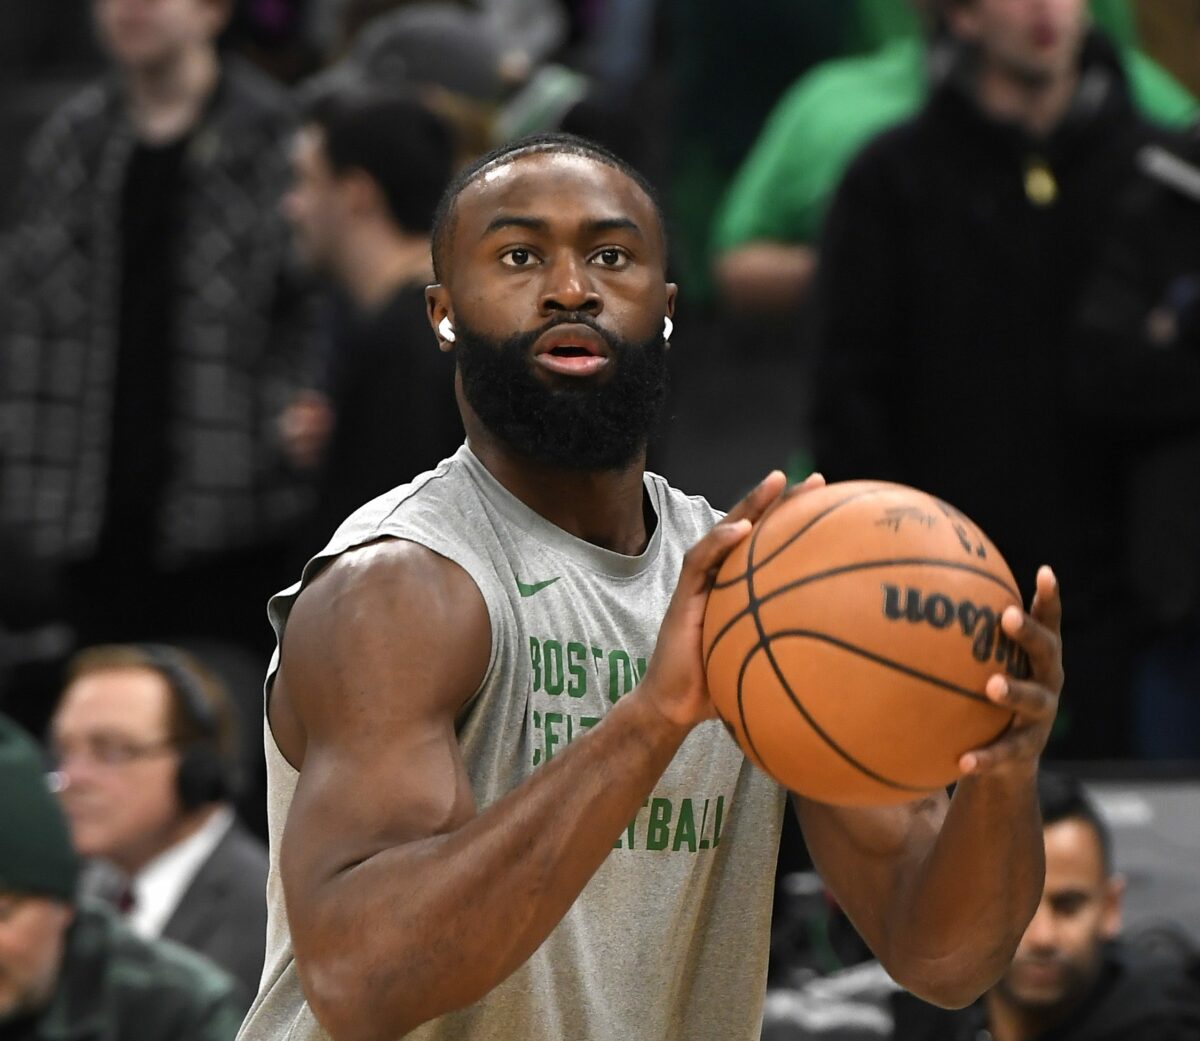 Boston’s Jaylen Brown boosts effort to raise juvenile prosecution age in MA to 20